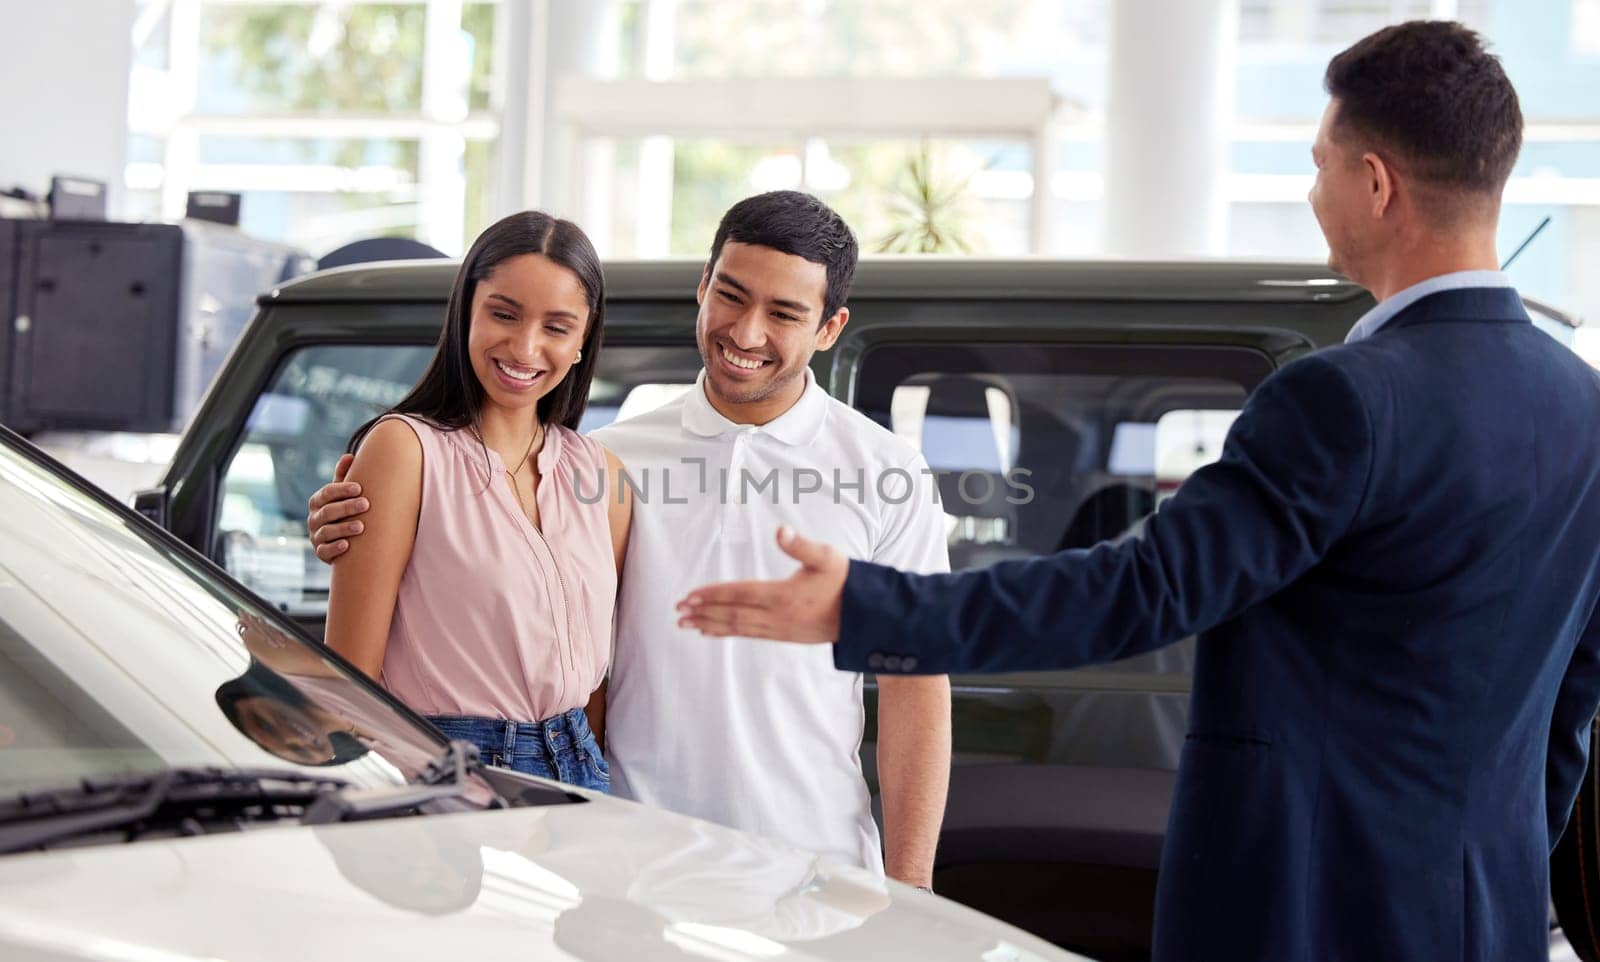 Couple at car dealership, choice and transportation with salesman, customer buying new transport with luxury. Sales, agreement and show cars with people at automobile showroom with purchase decision.